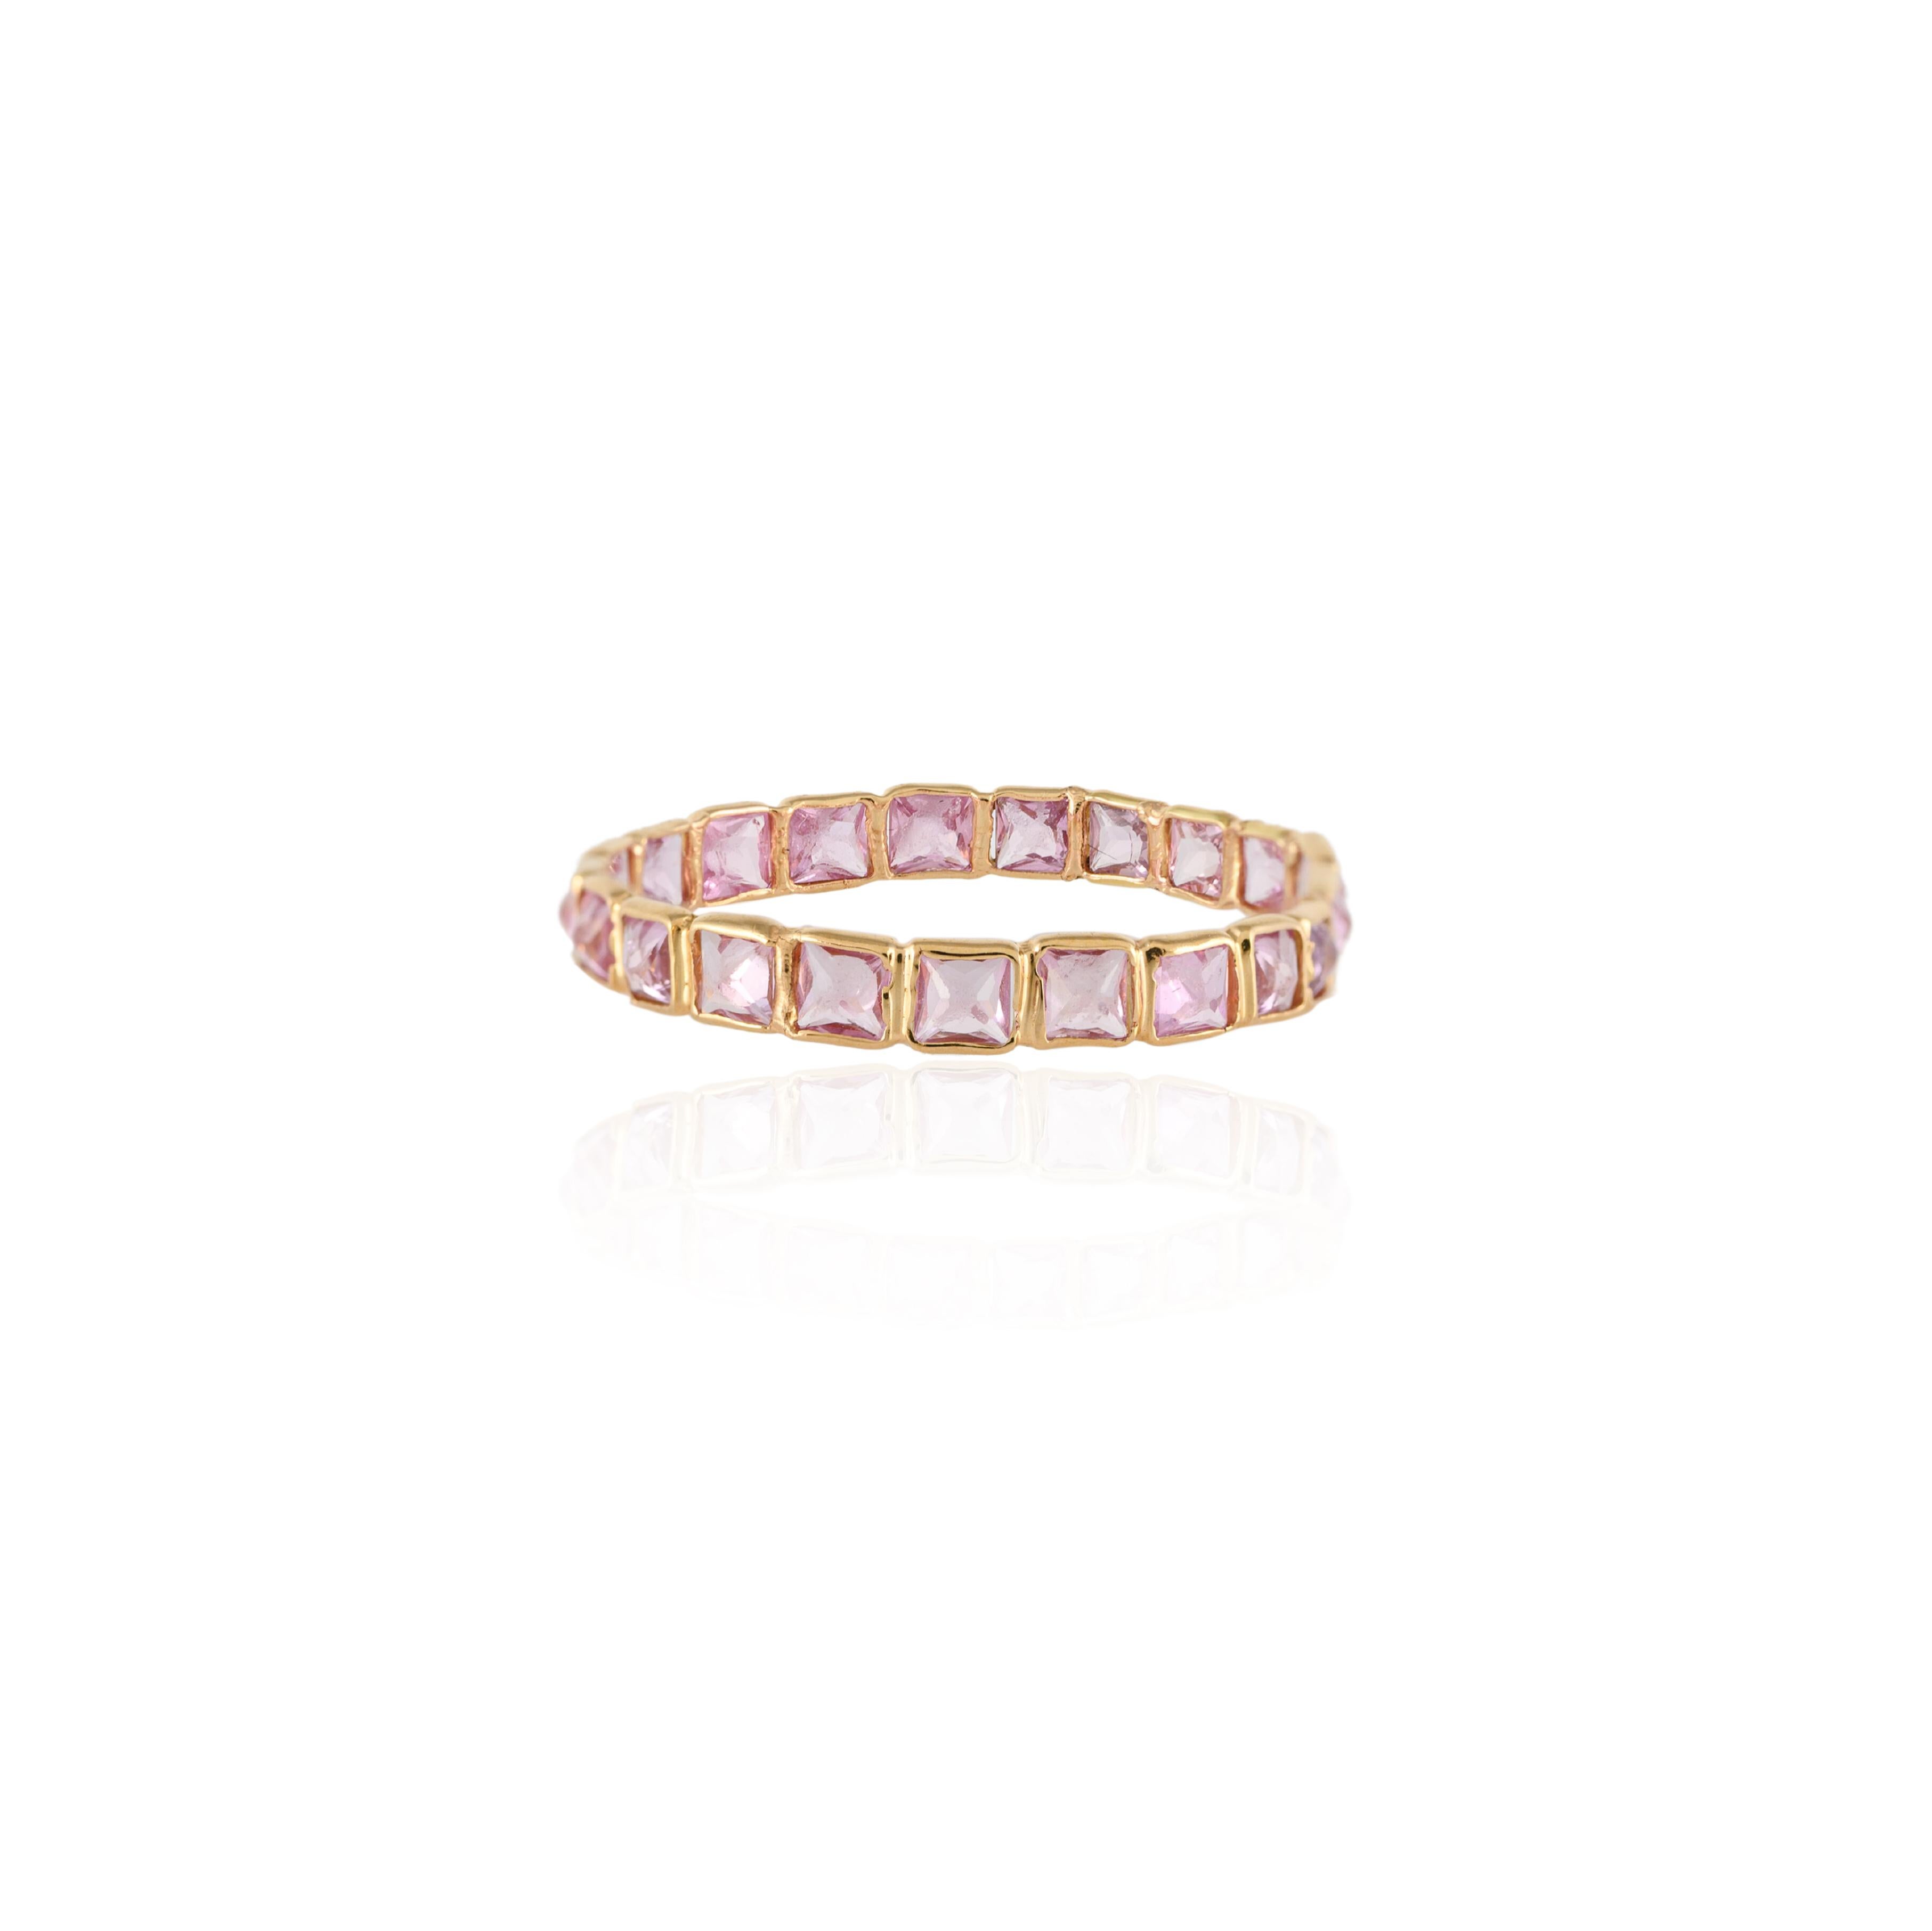 For Sale:  18 Karat Solid Yellow Gold Thin Pink Sapphire Eternity Band Ring, Everyday Ring  7